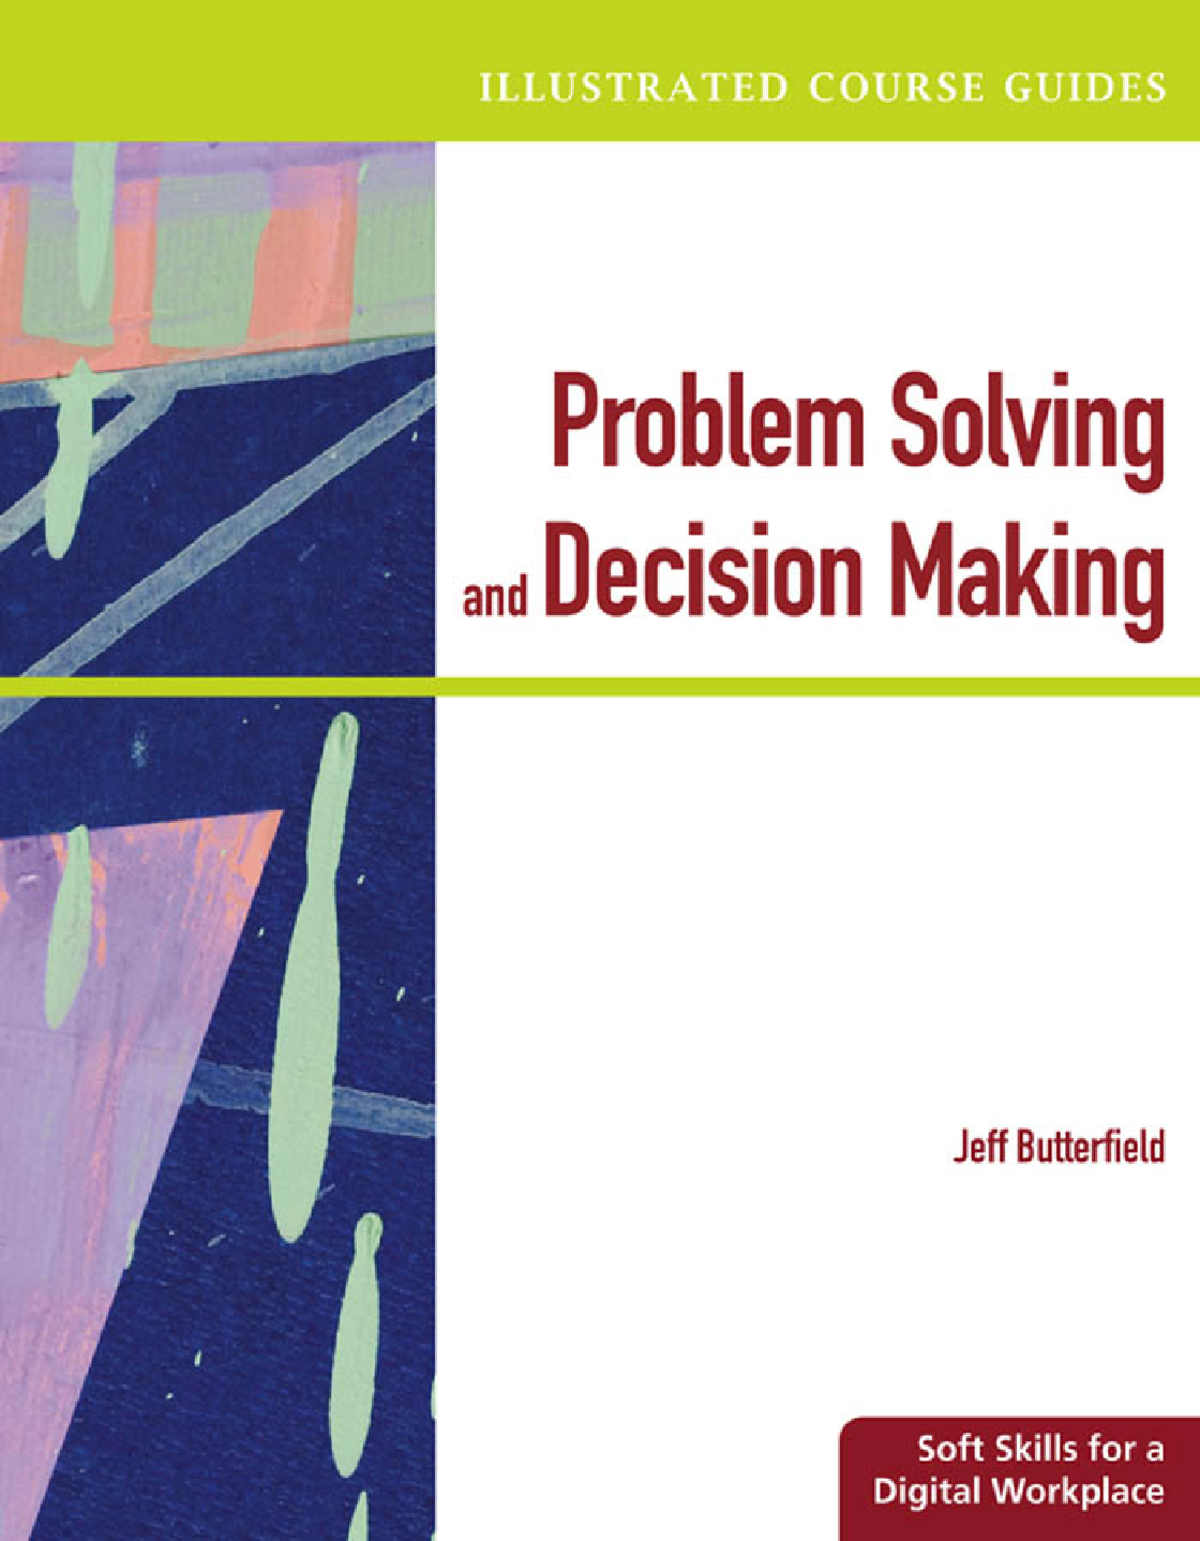 problem solving and decision making jeff butterfield